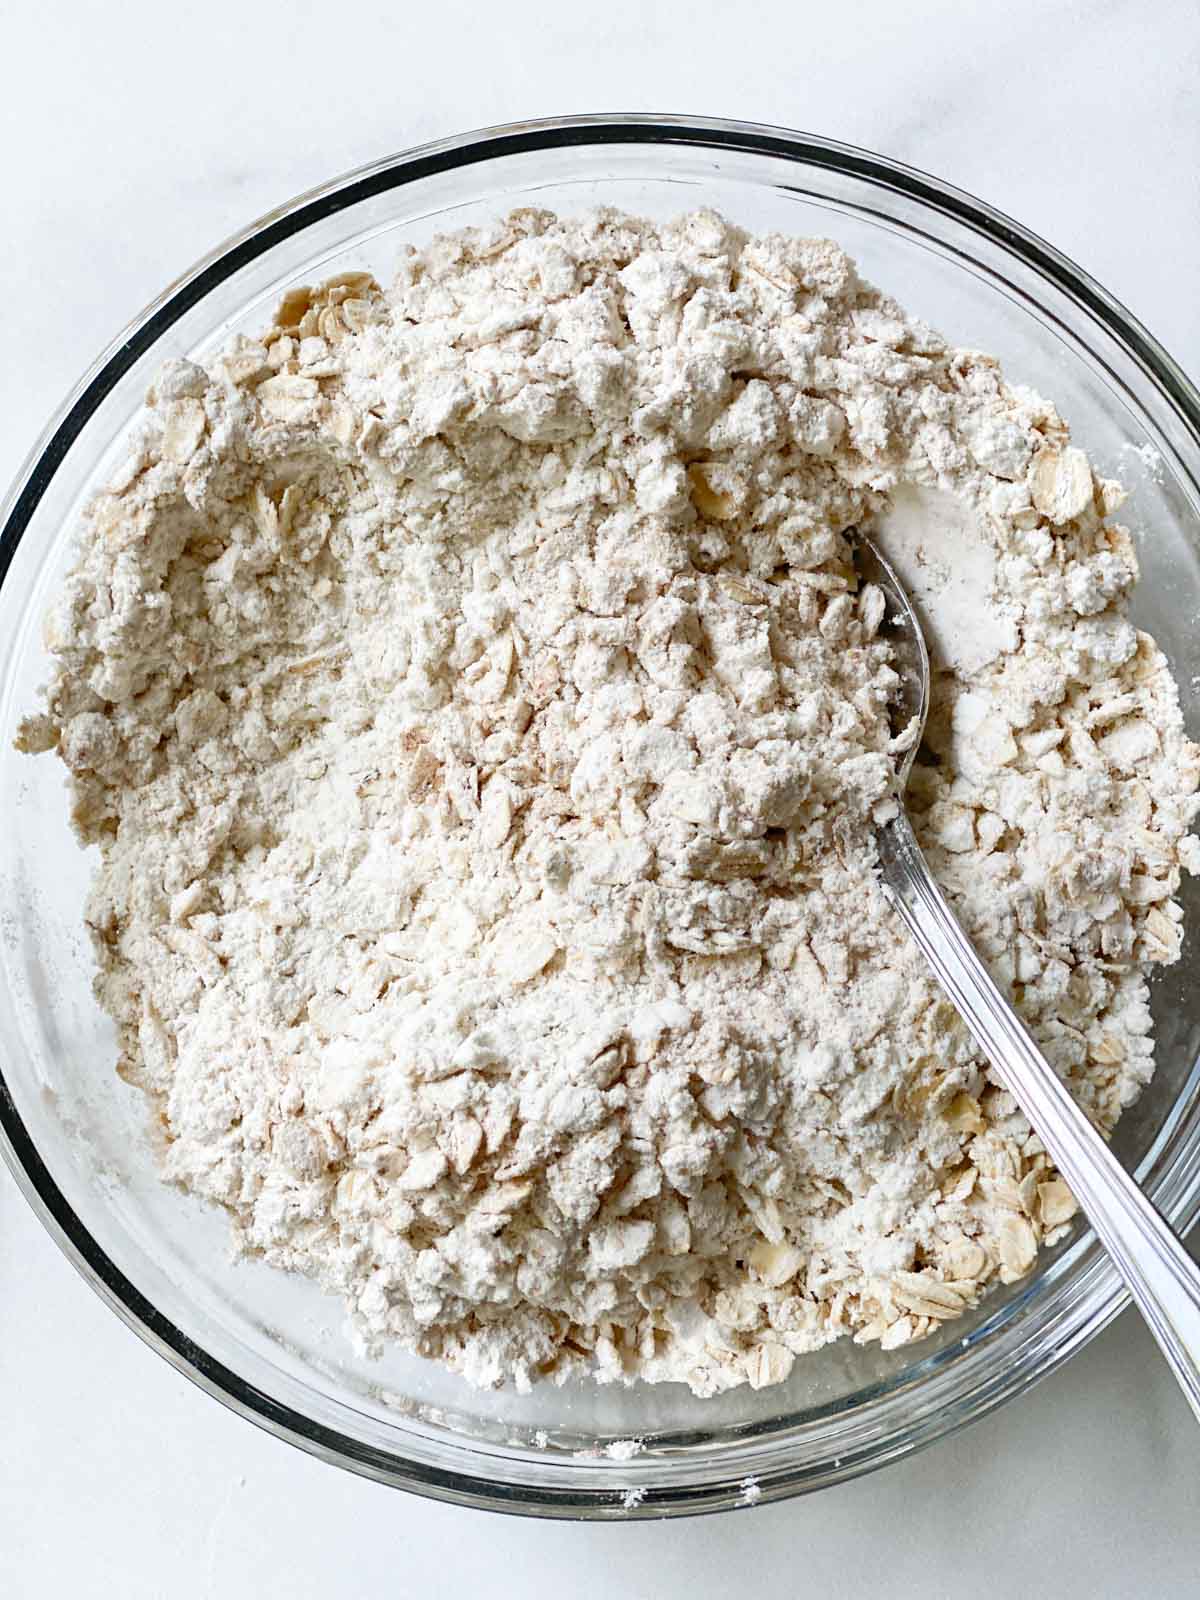 Mixing oats into dry ingredients.